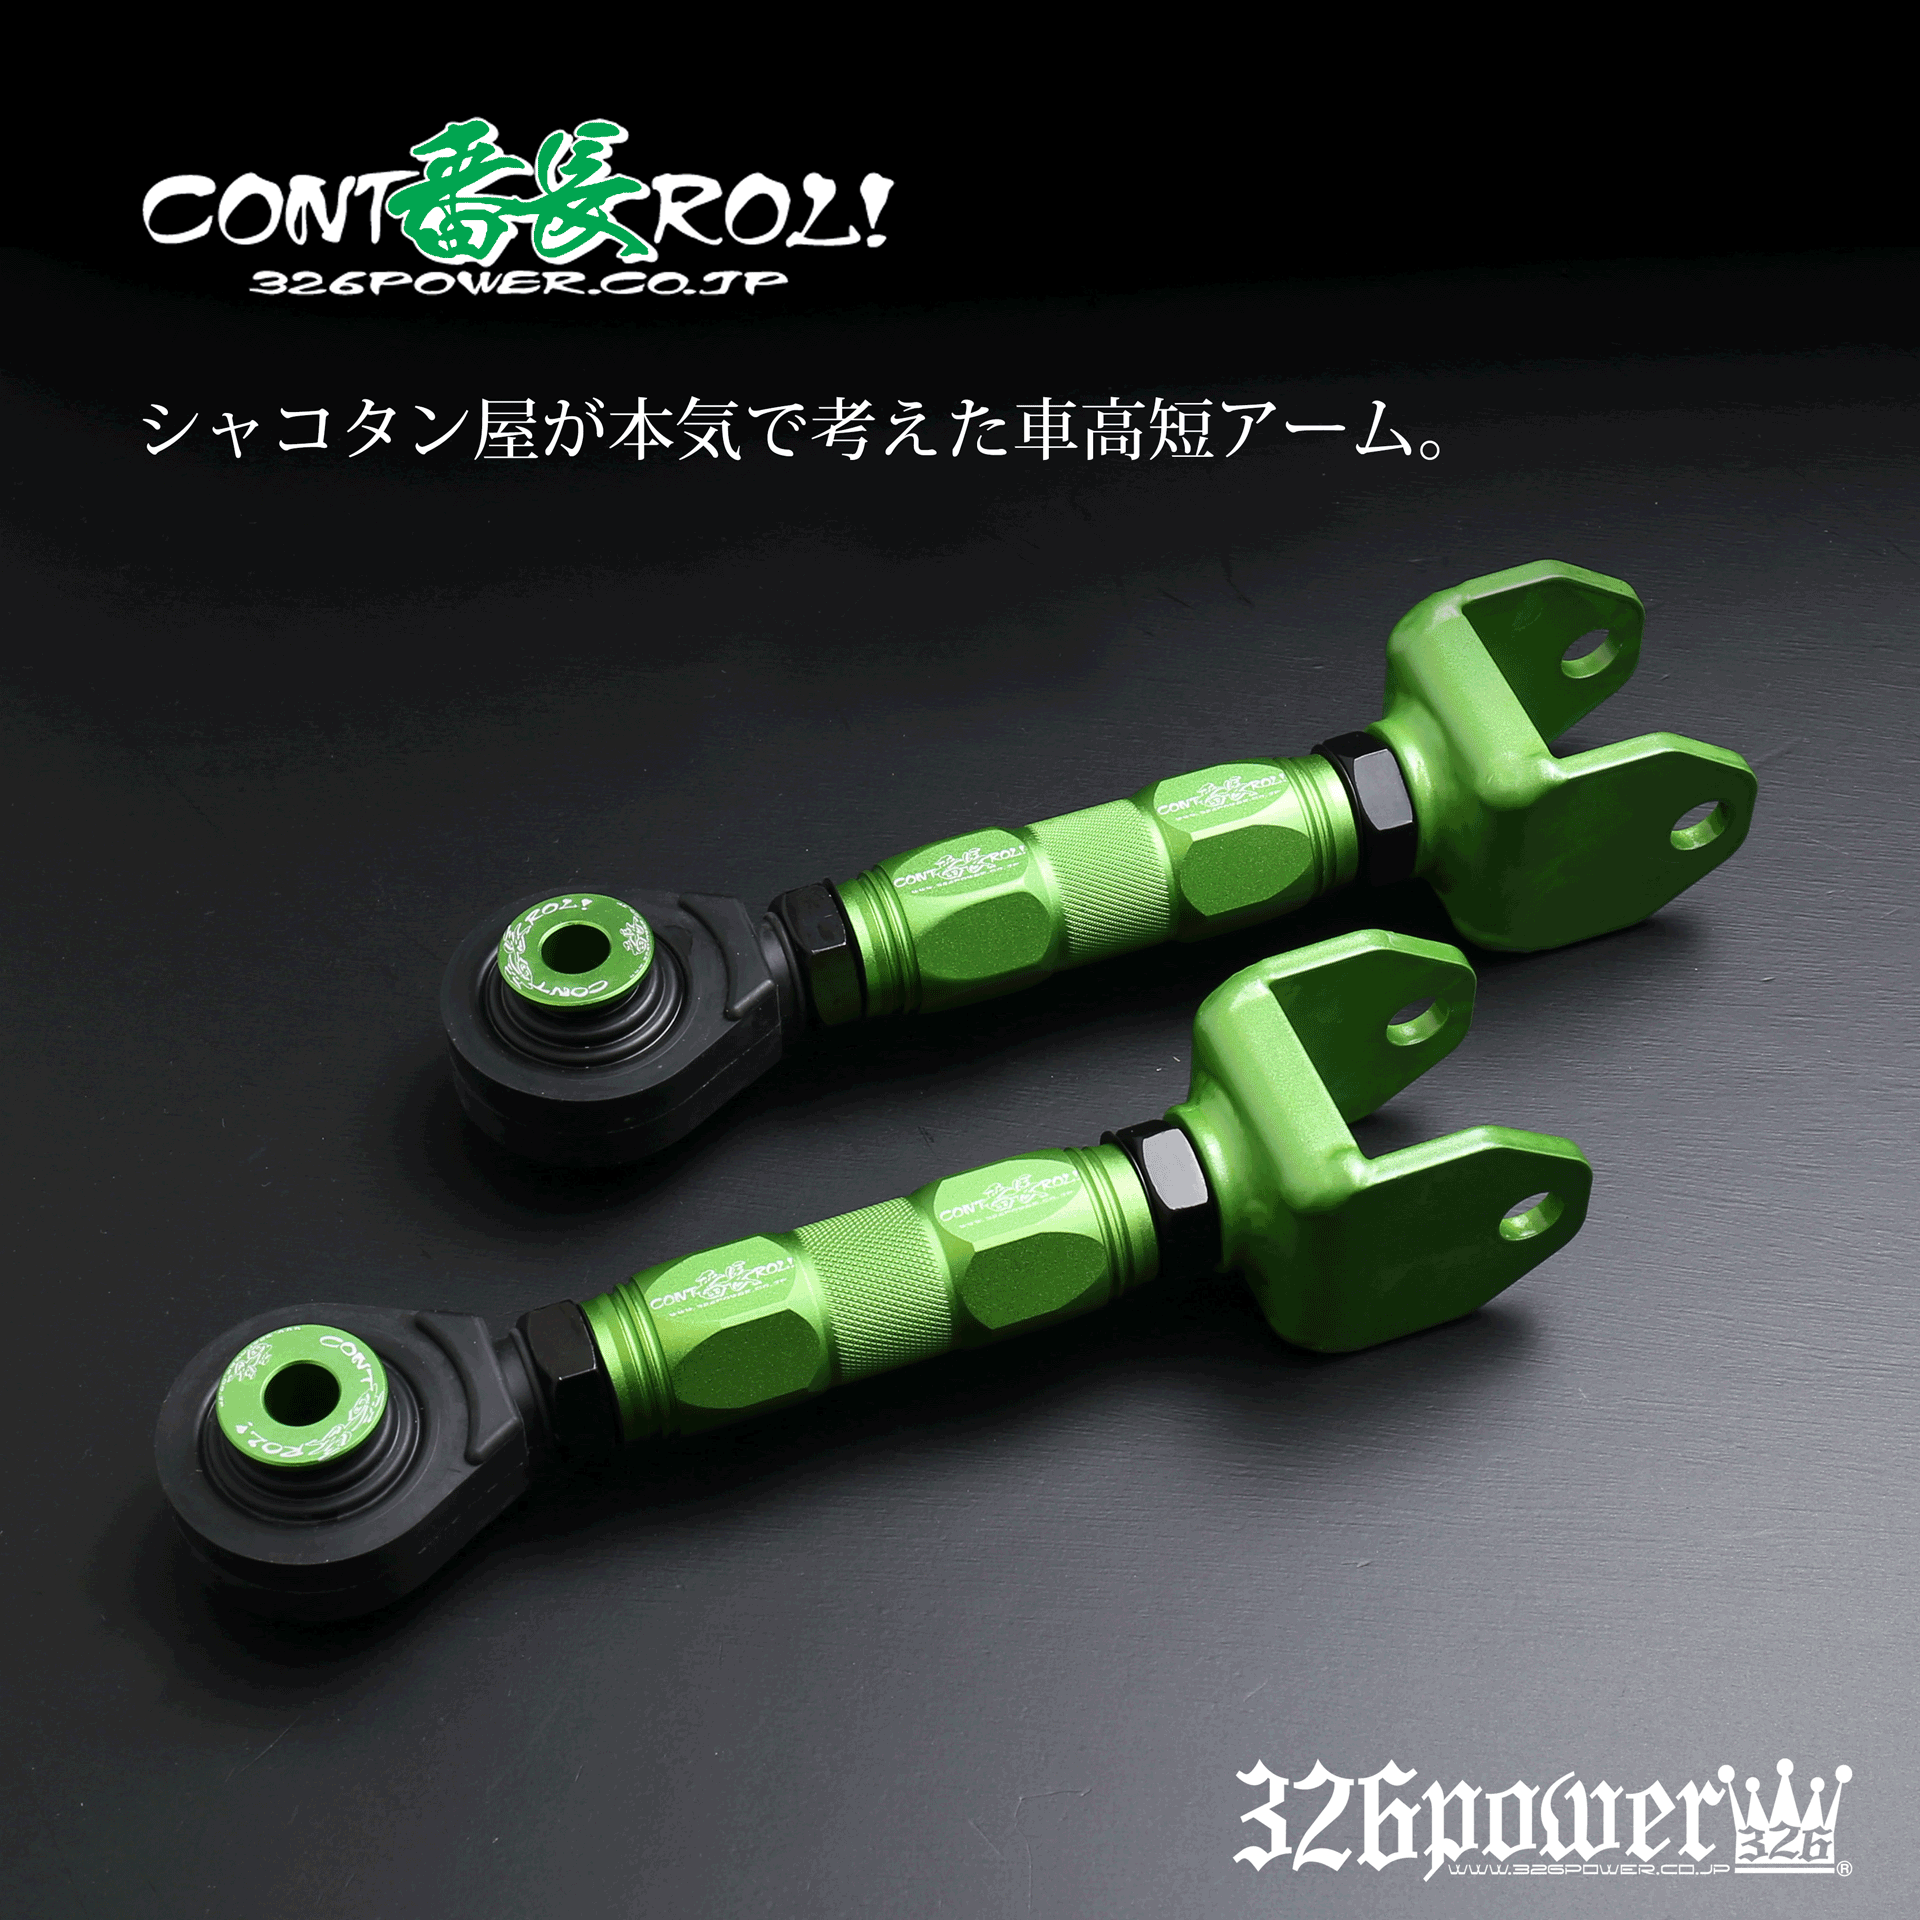 326 Power - Adjustable Traction Arm - S14/S15